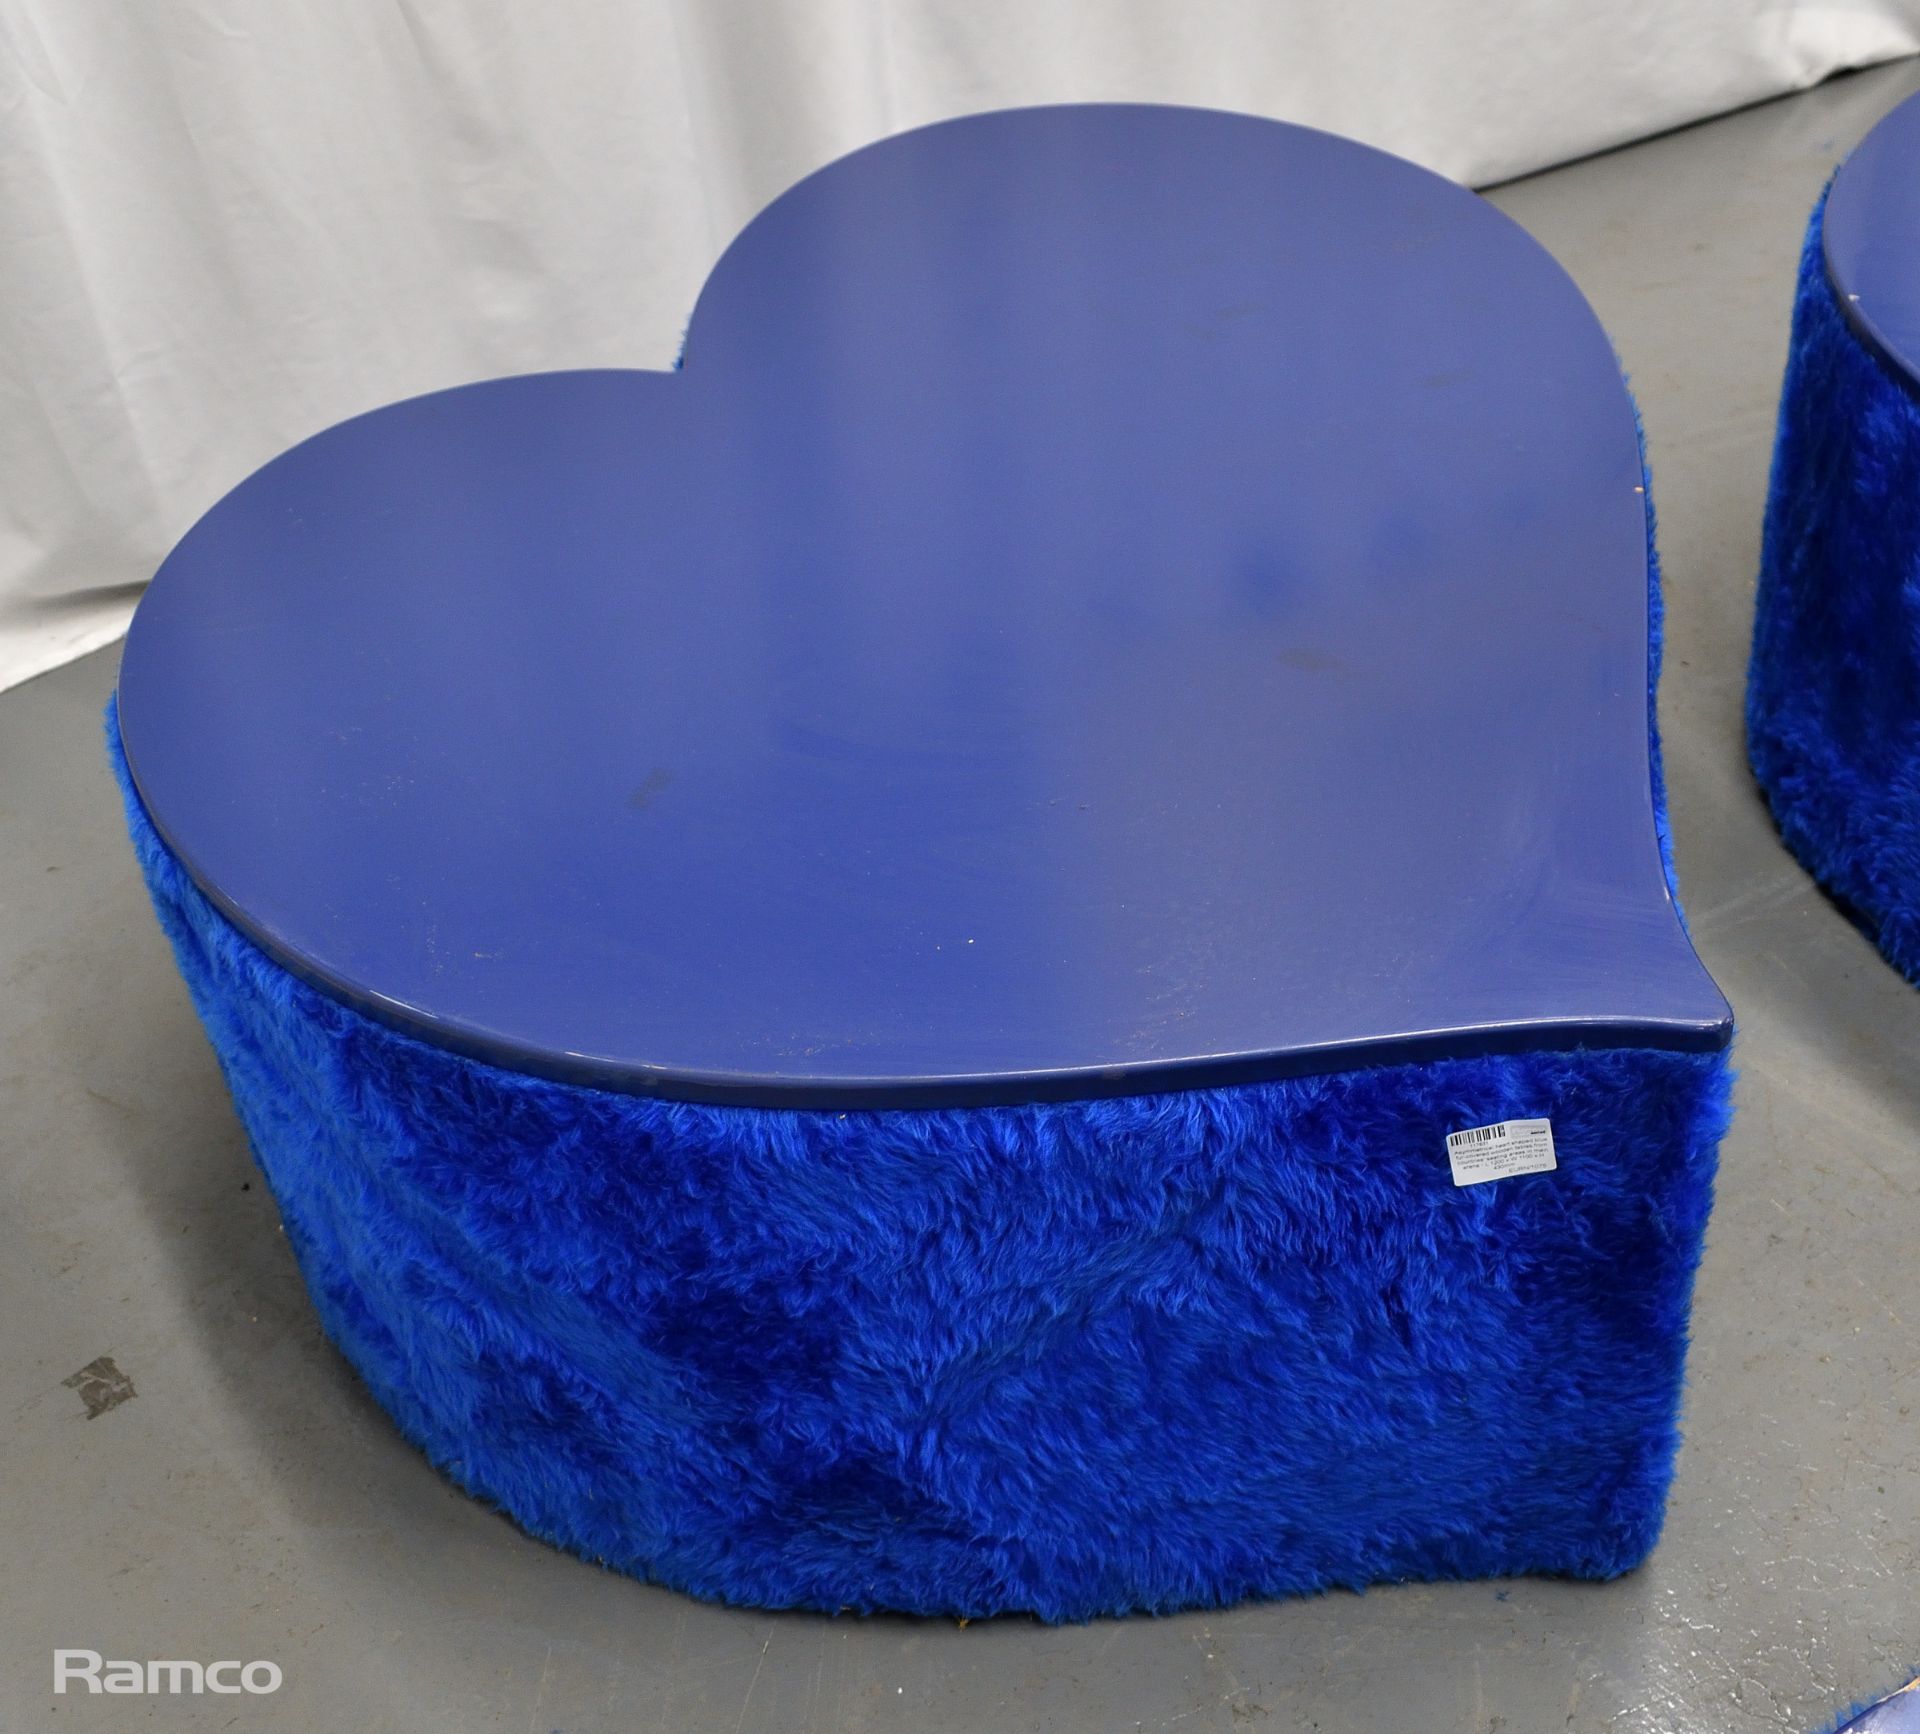 3x Asymmetrical heart shaped blue fur-covered wooden tables from countries' seating area - Image 6 of 13